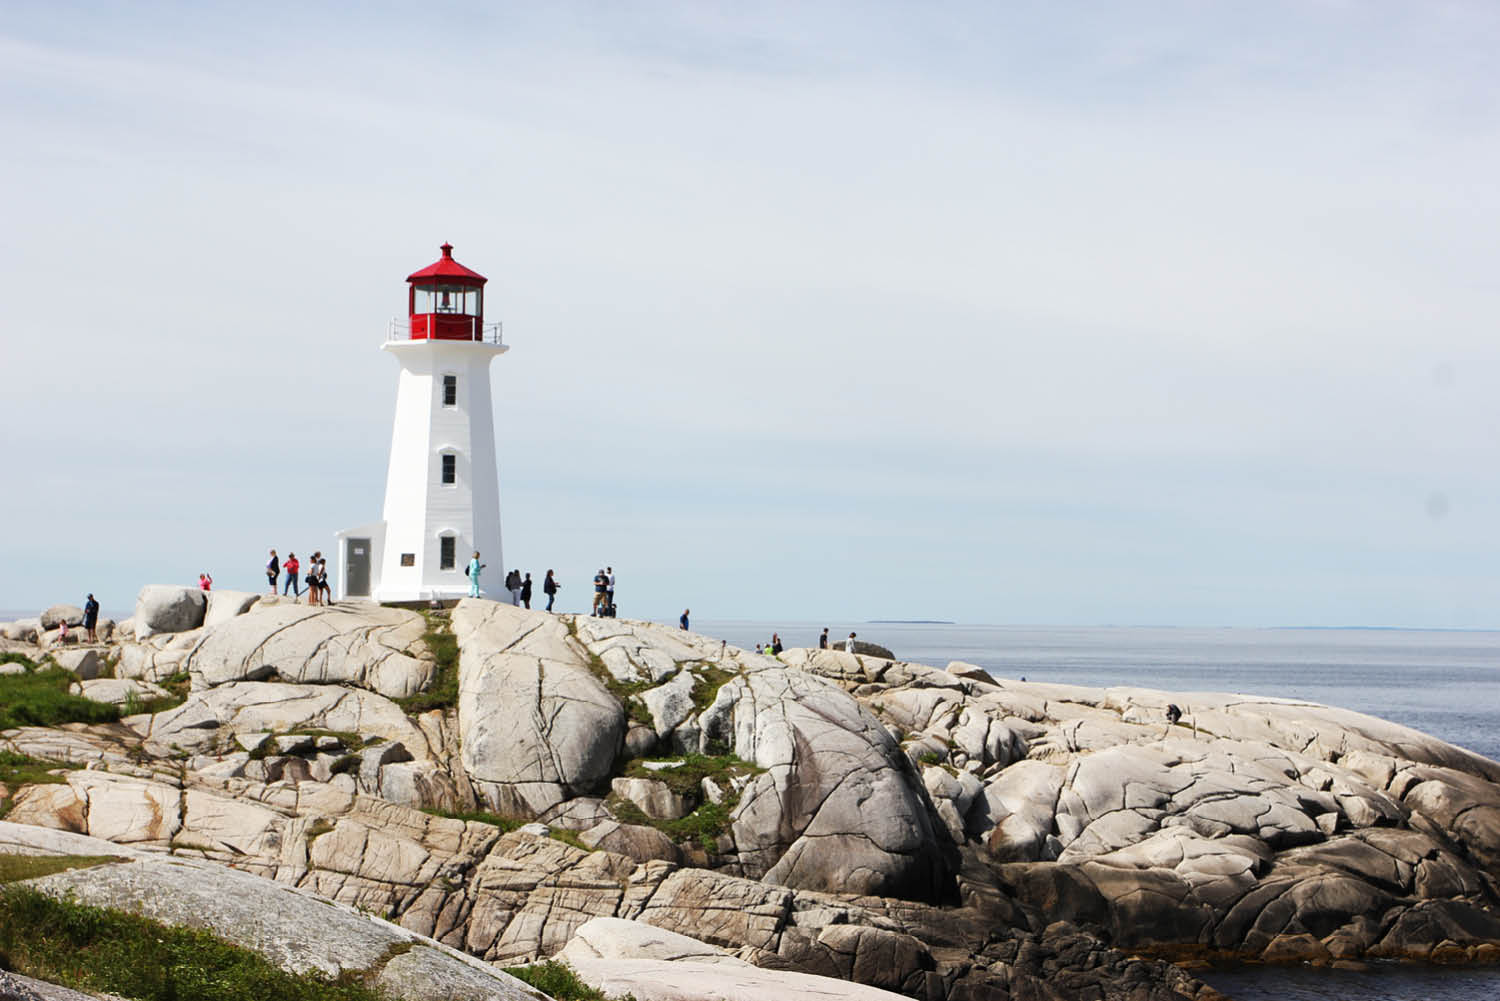 Peggy’s Point Lighthouse at Peggy’s Cove